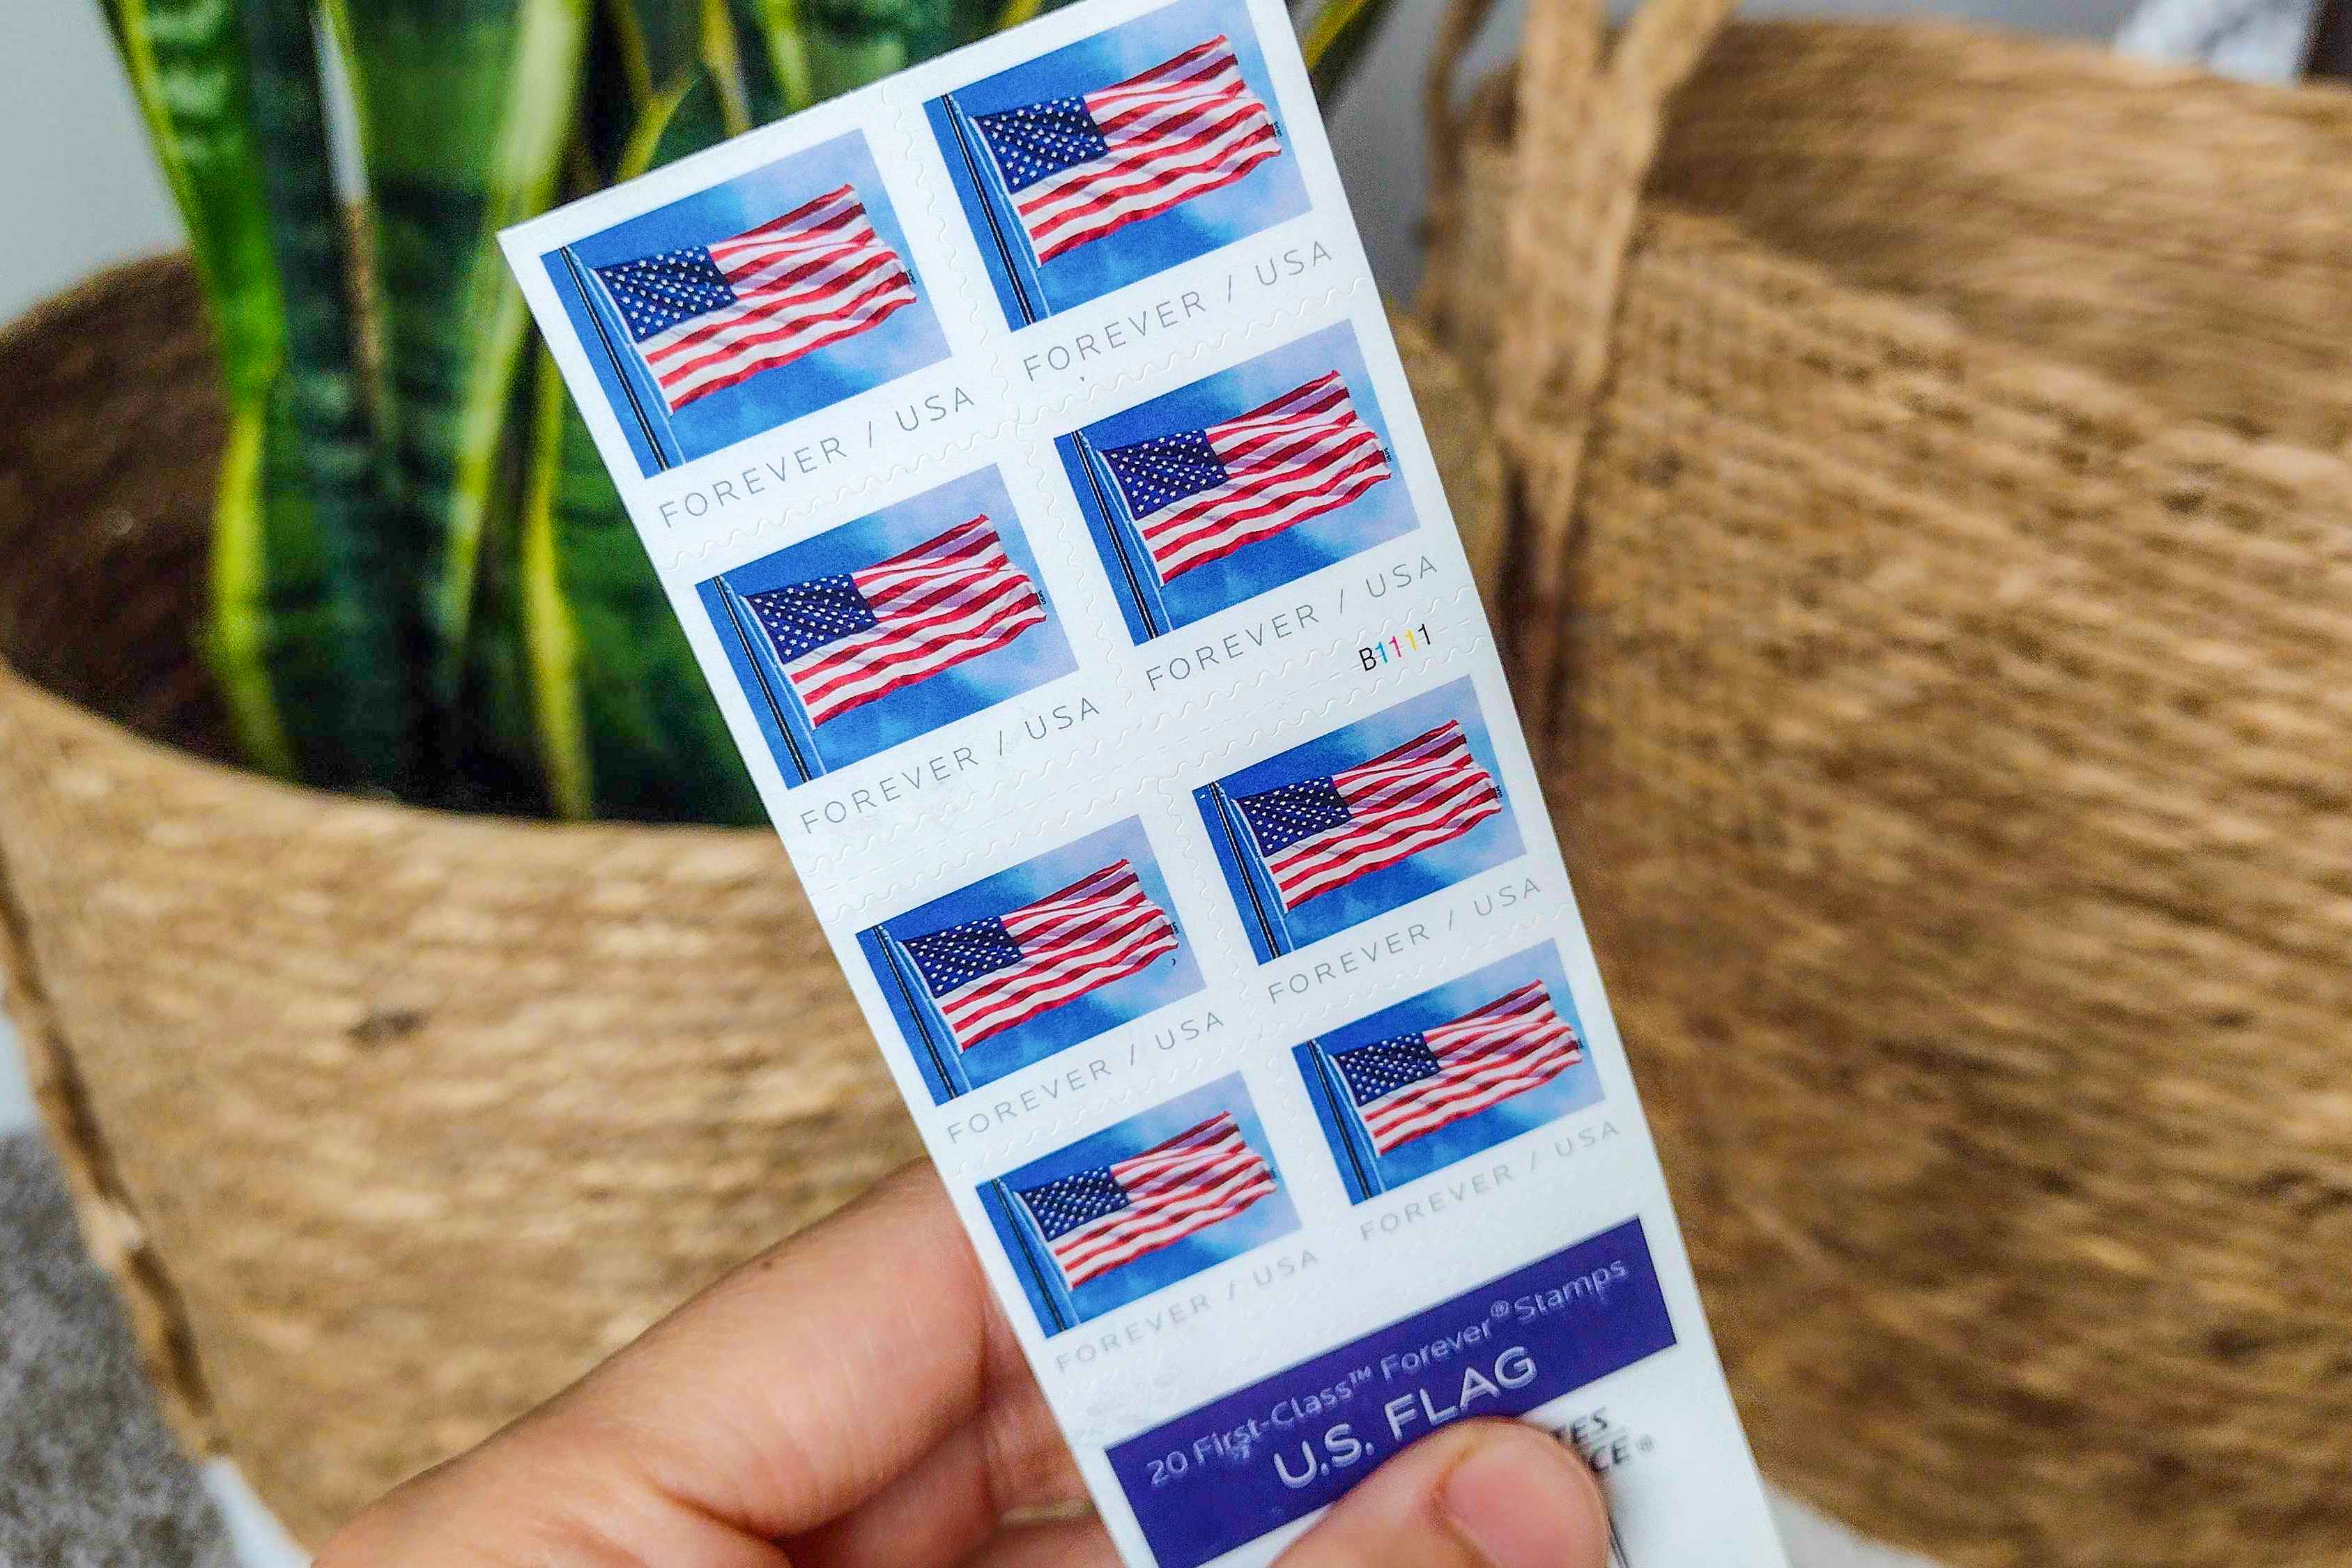 A person's hand holding some American flag Forever postage stamps.